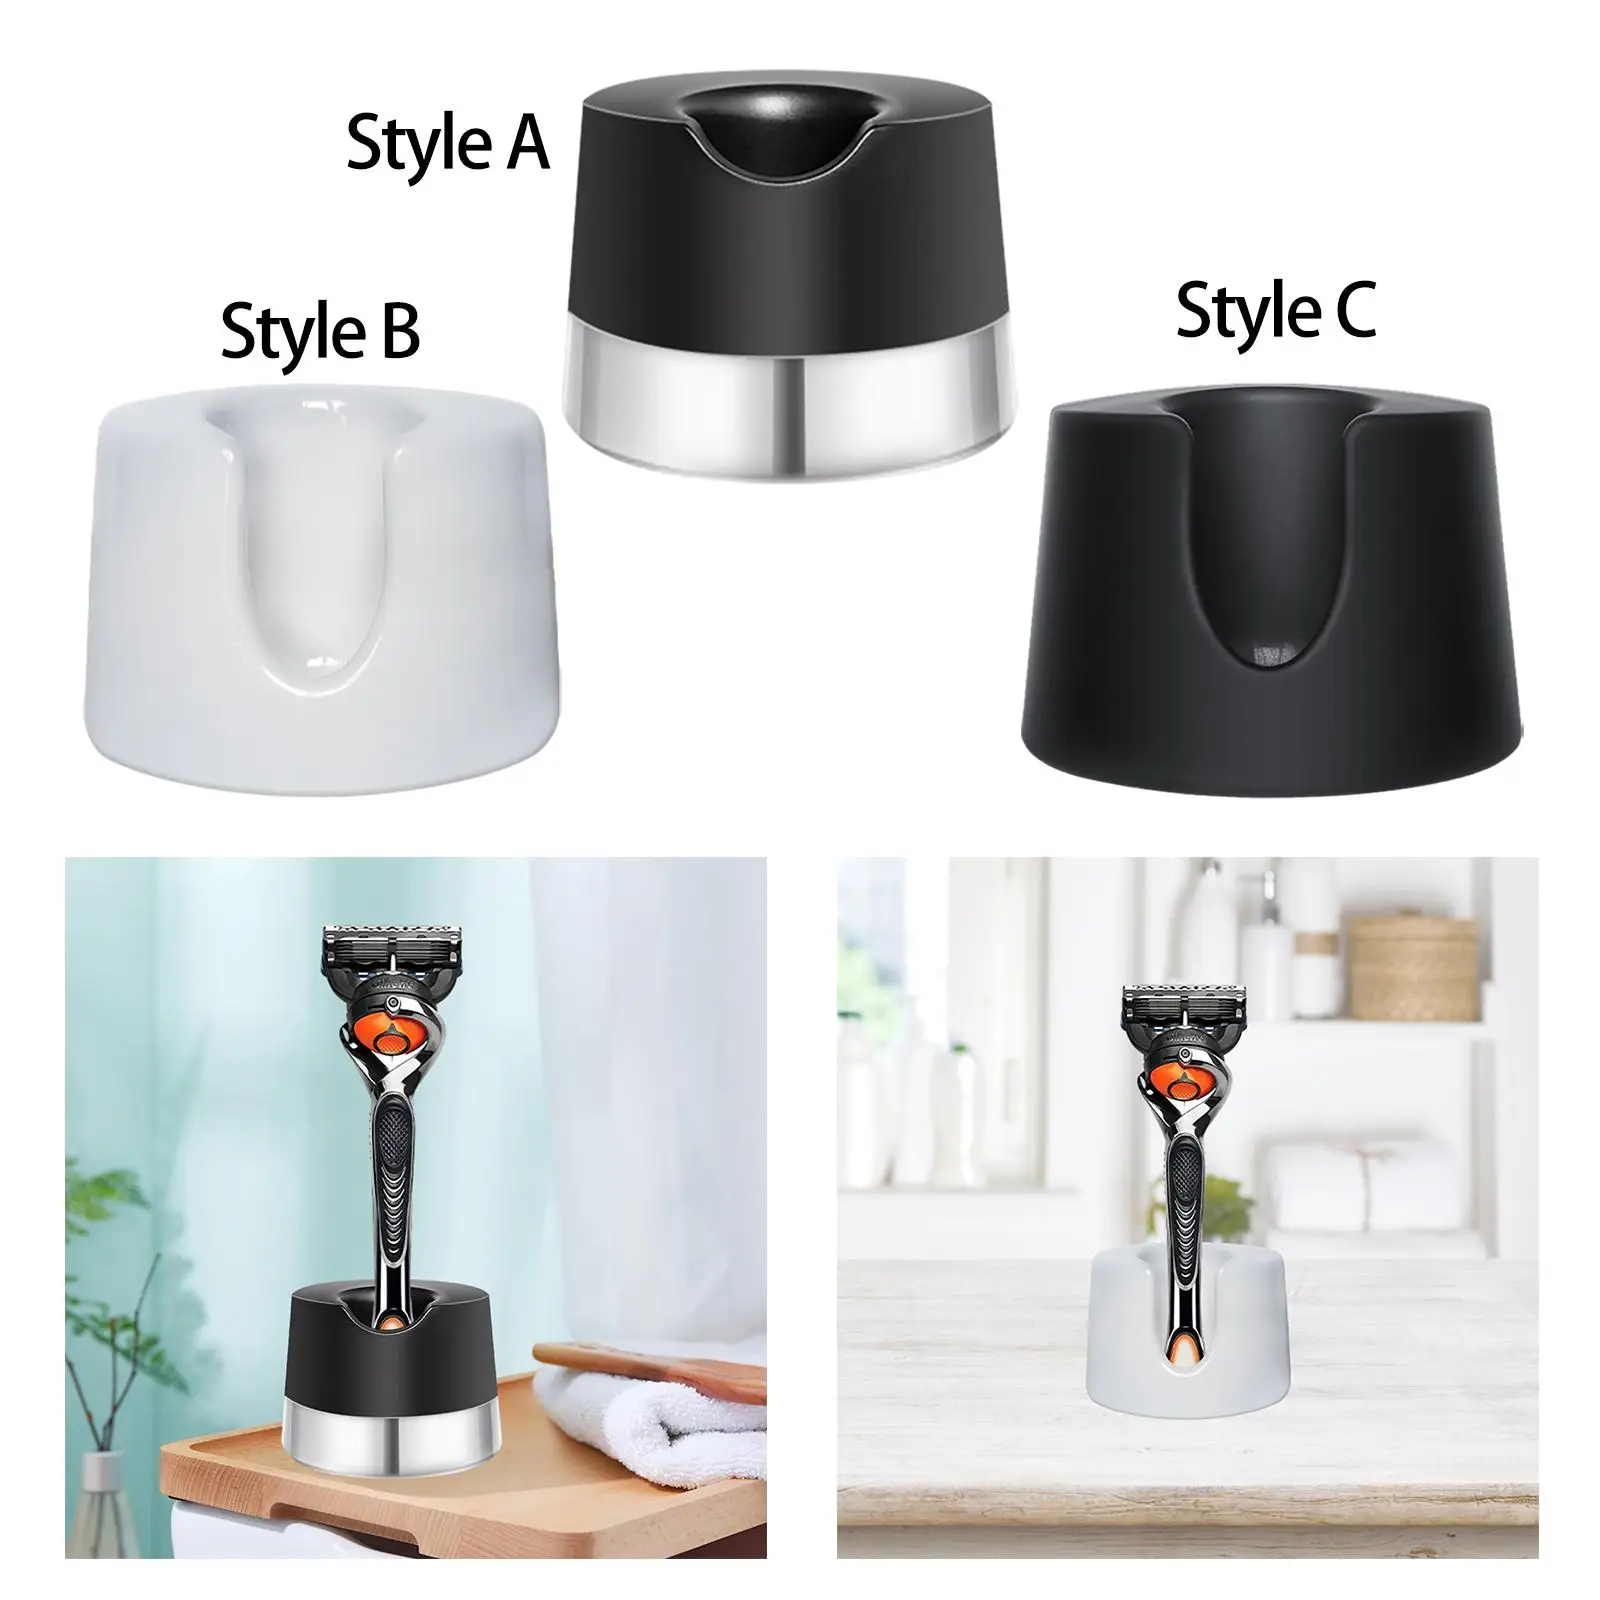 Manual Shaver Holder Drying Stand Stability Countertops Accessories Safety Shaver Holder Base Shaver Holder for Skin Chill